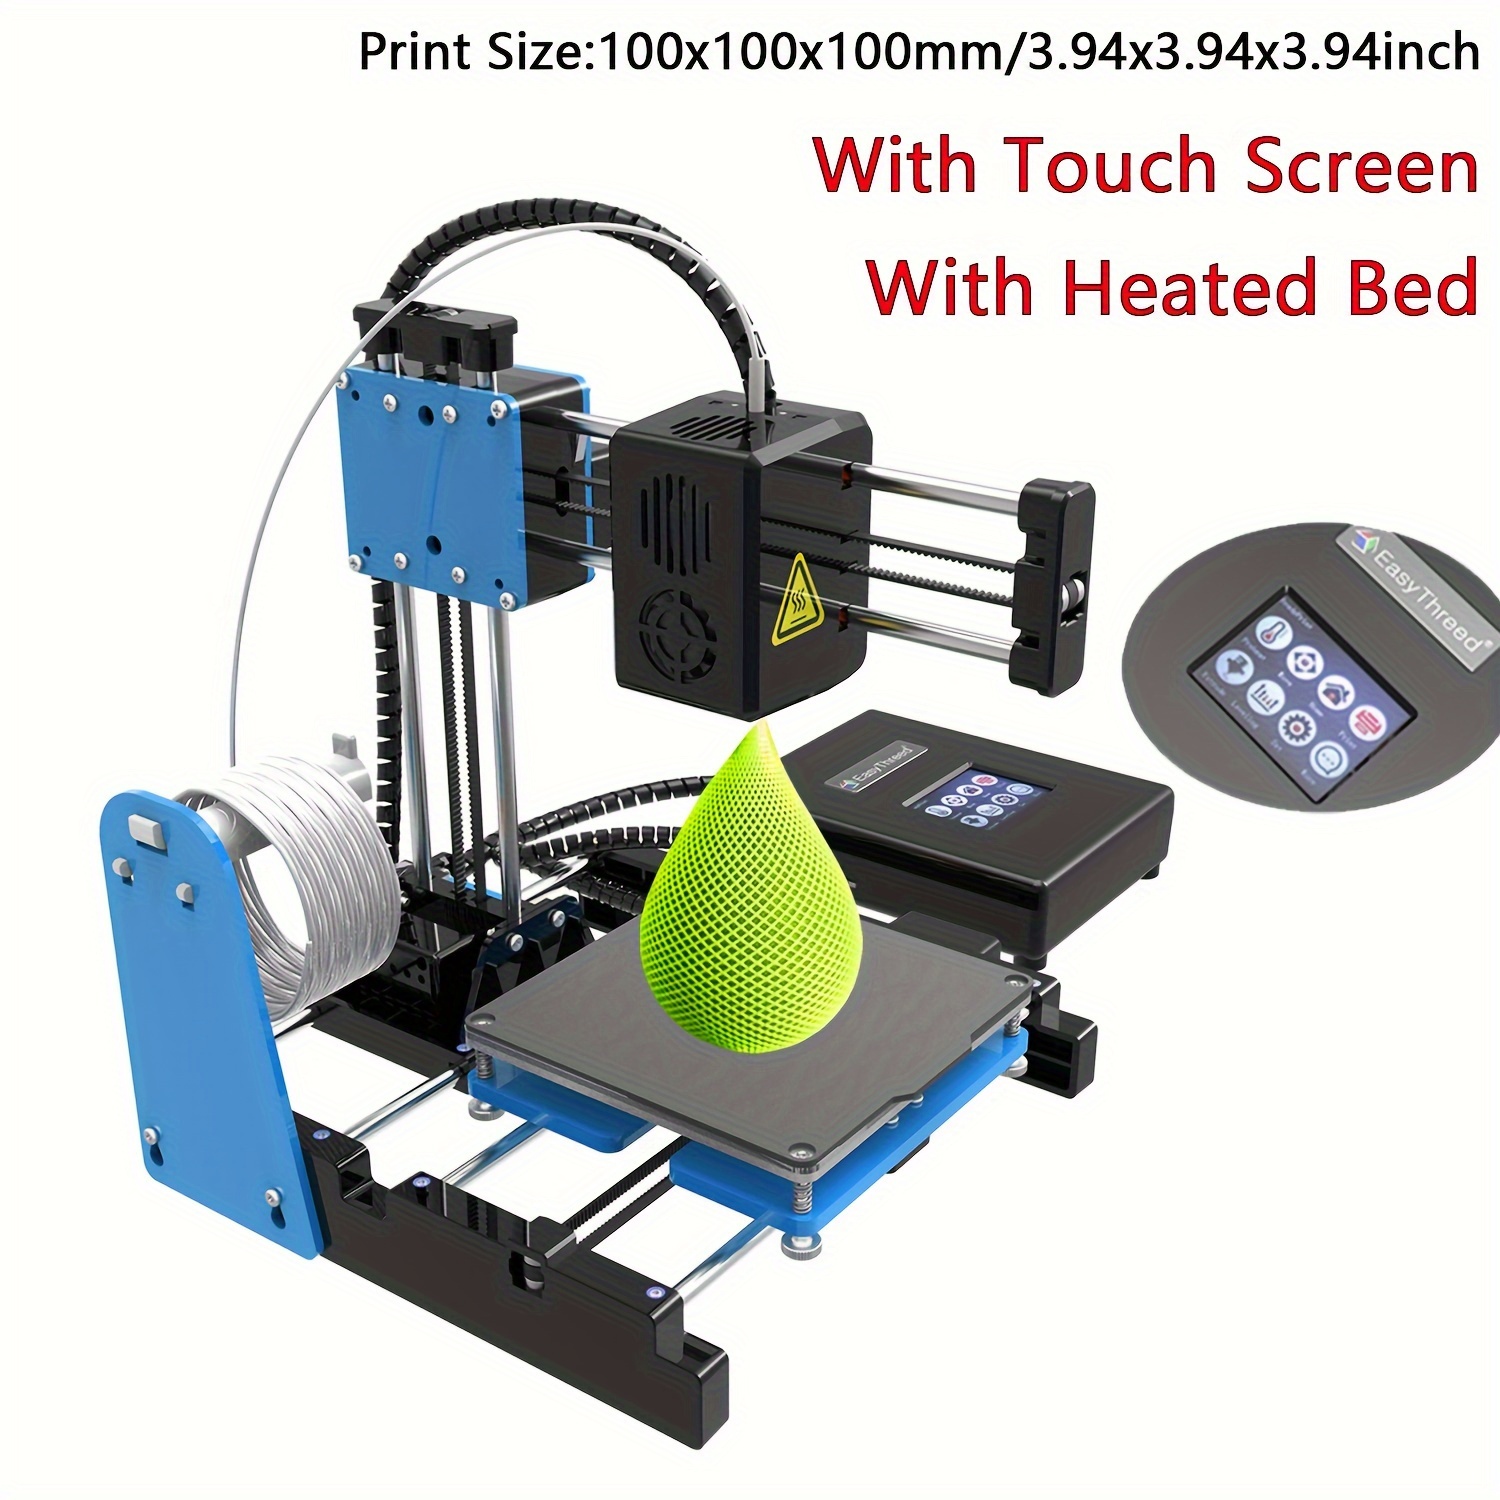 EasyThreed 3D Printer X2plus For Beginners With Touch Screen Heated Bed Low  Noise With Free PLA TPU 1.75mm Filament Printing Size 4''x4''x4'' US PLUG